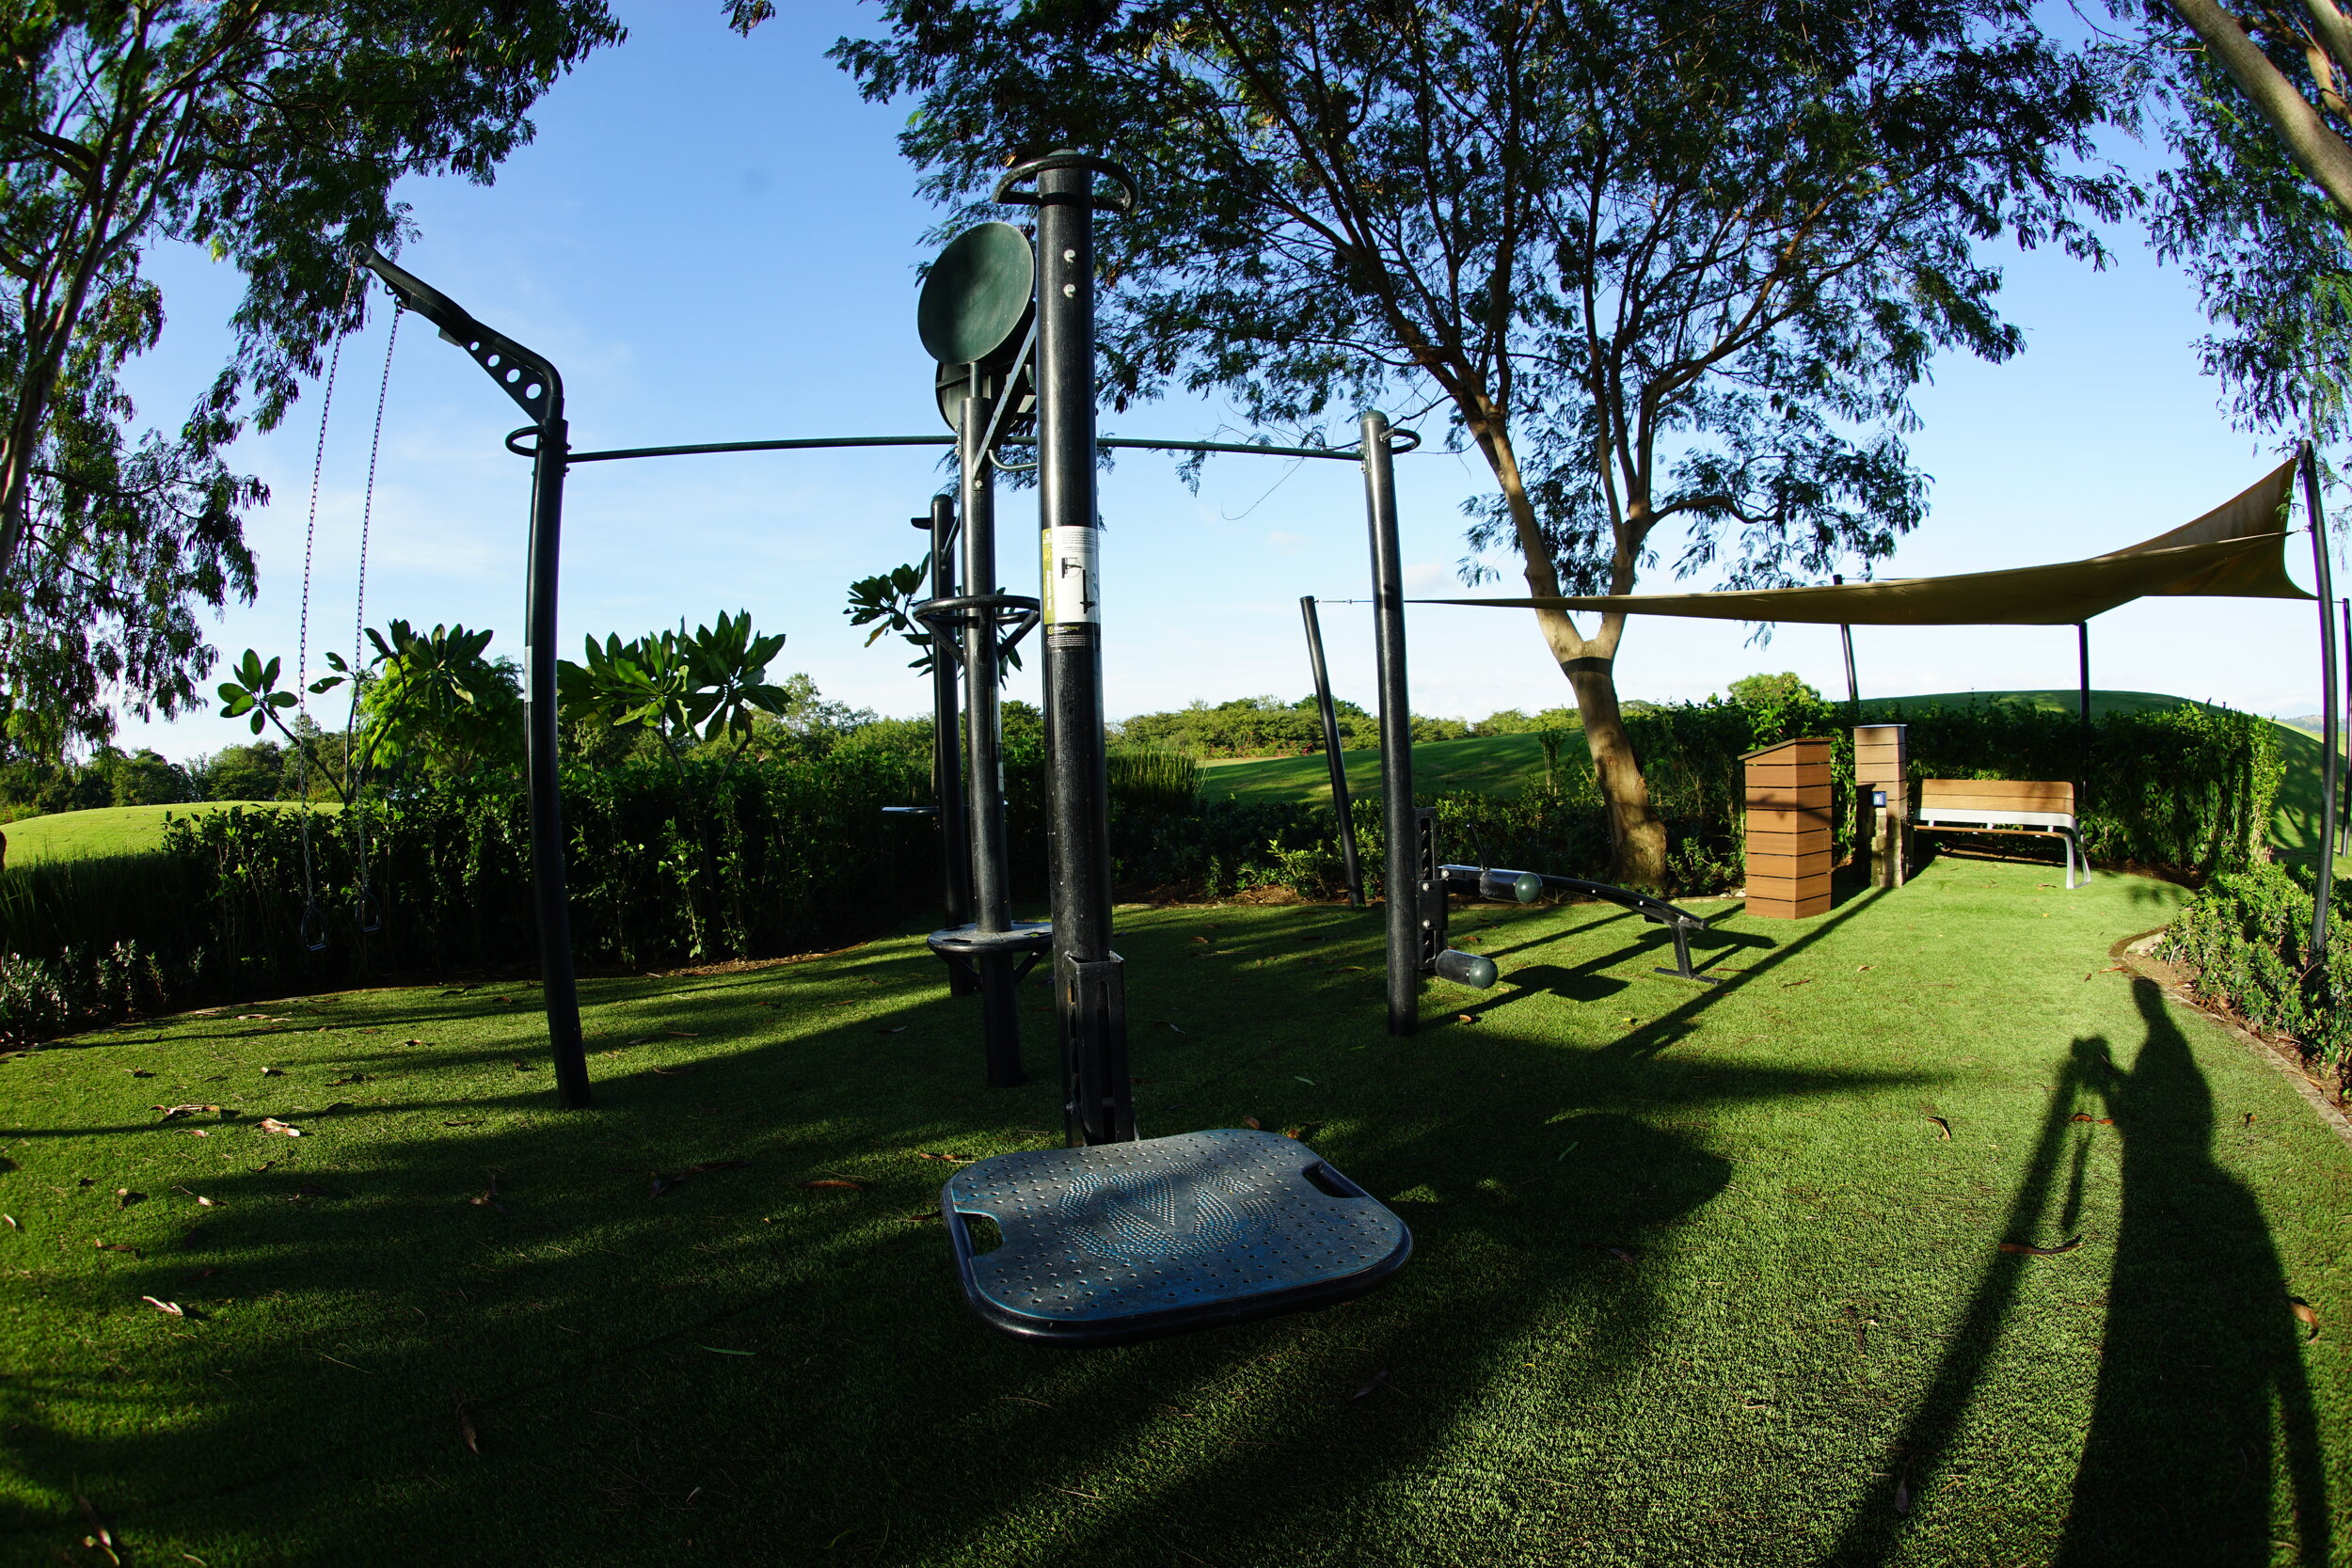 Outdoor fitness equipment with shaded canopy